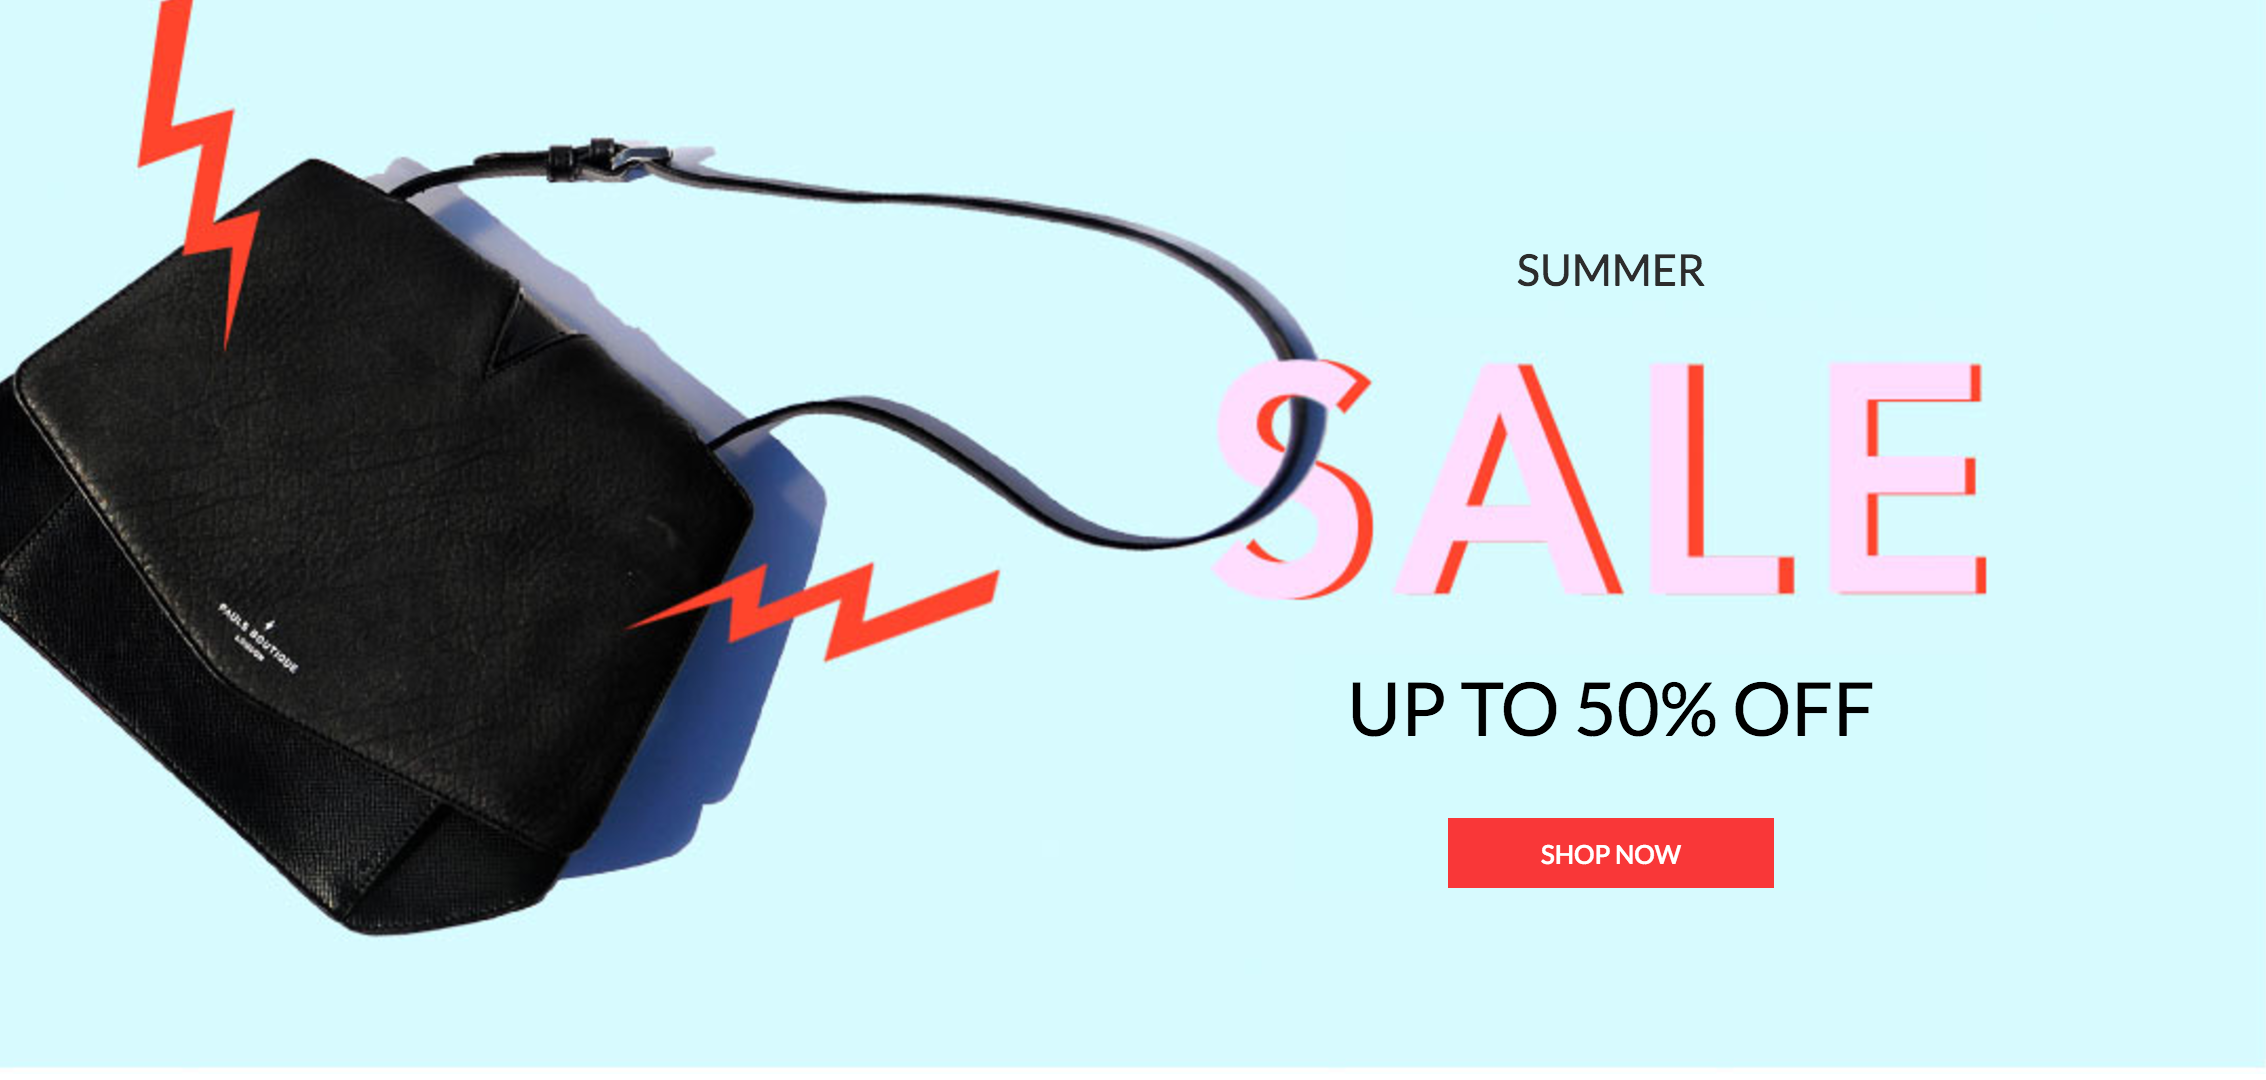 Pauls Boutique: Summer Sale up to 50% off handbags and purses